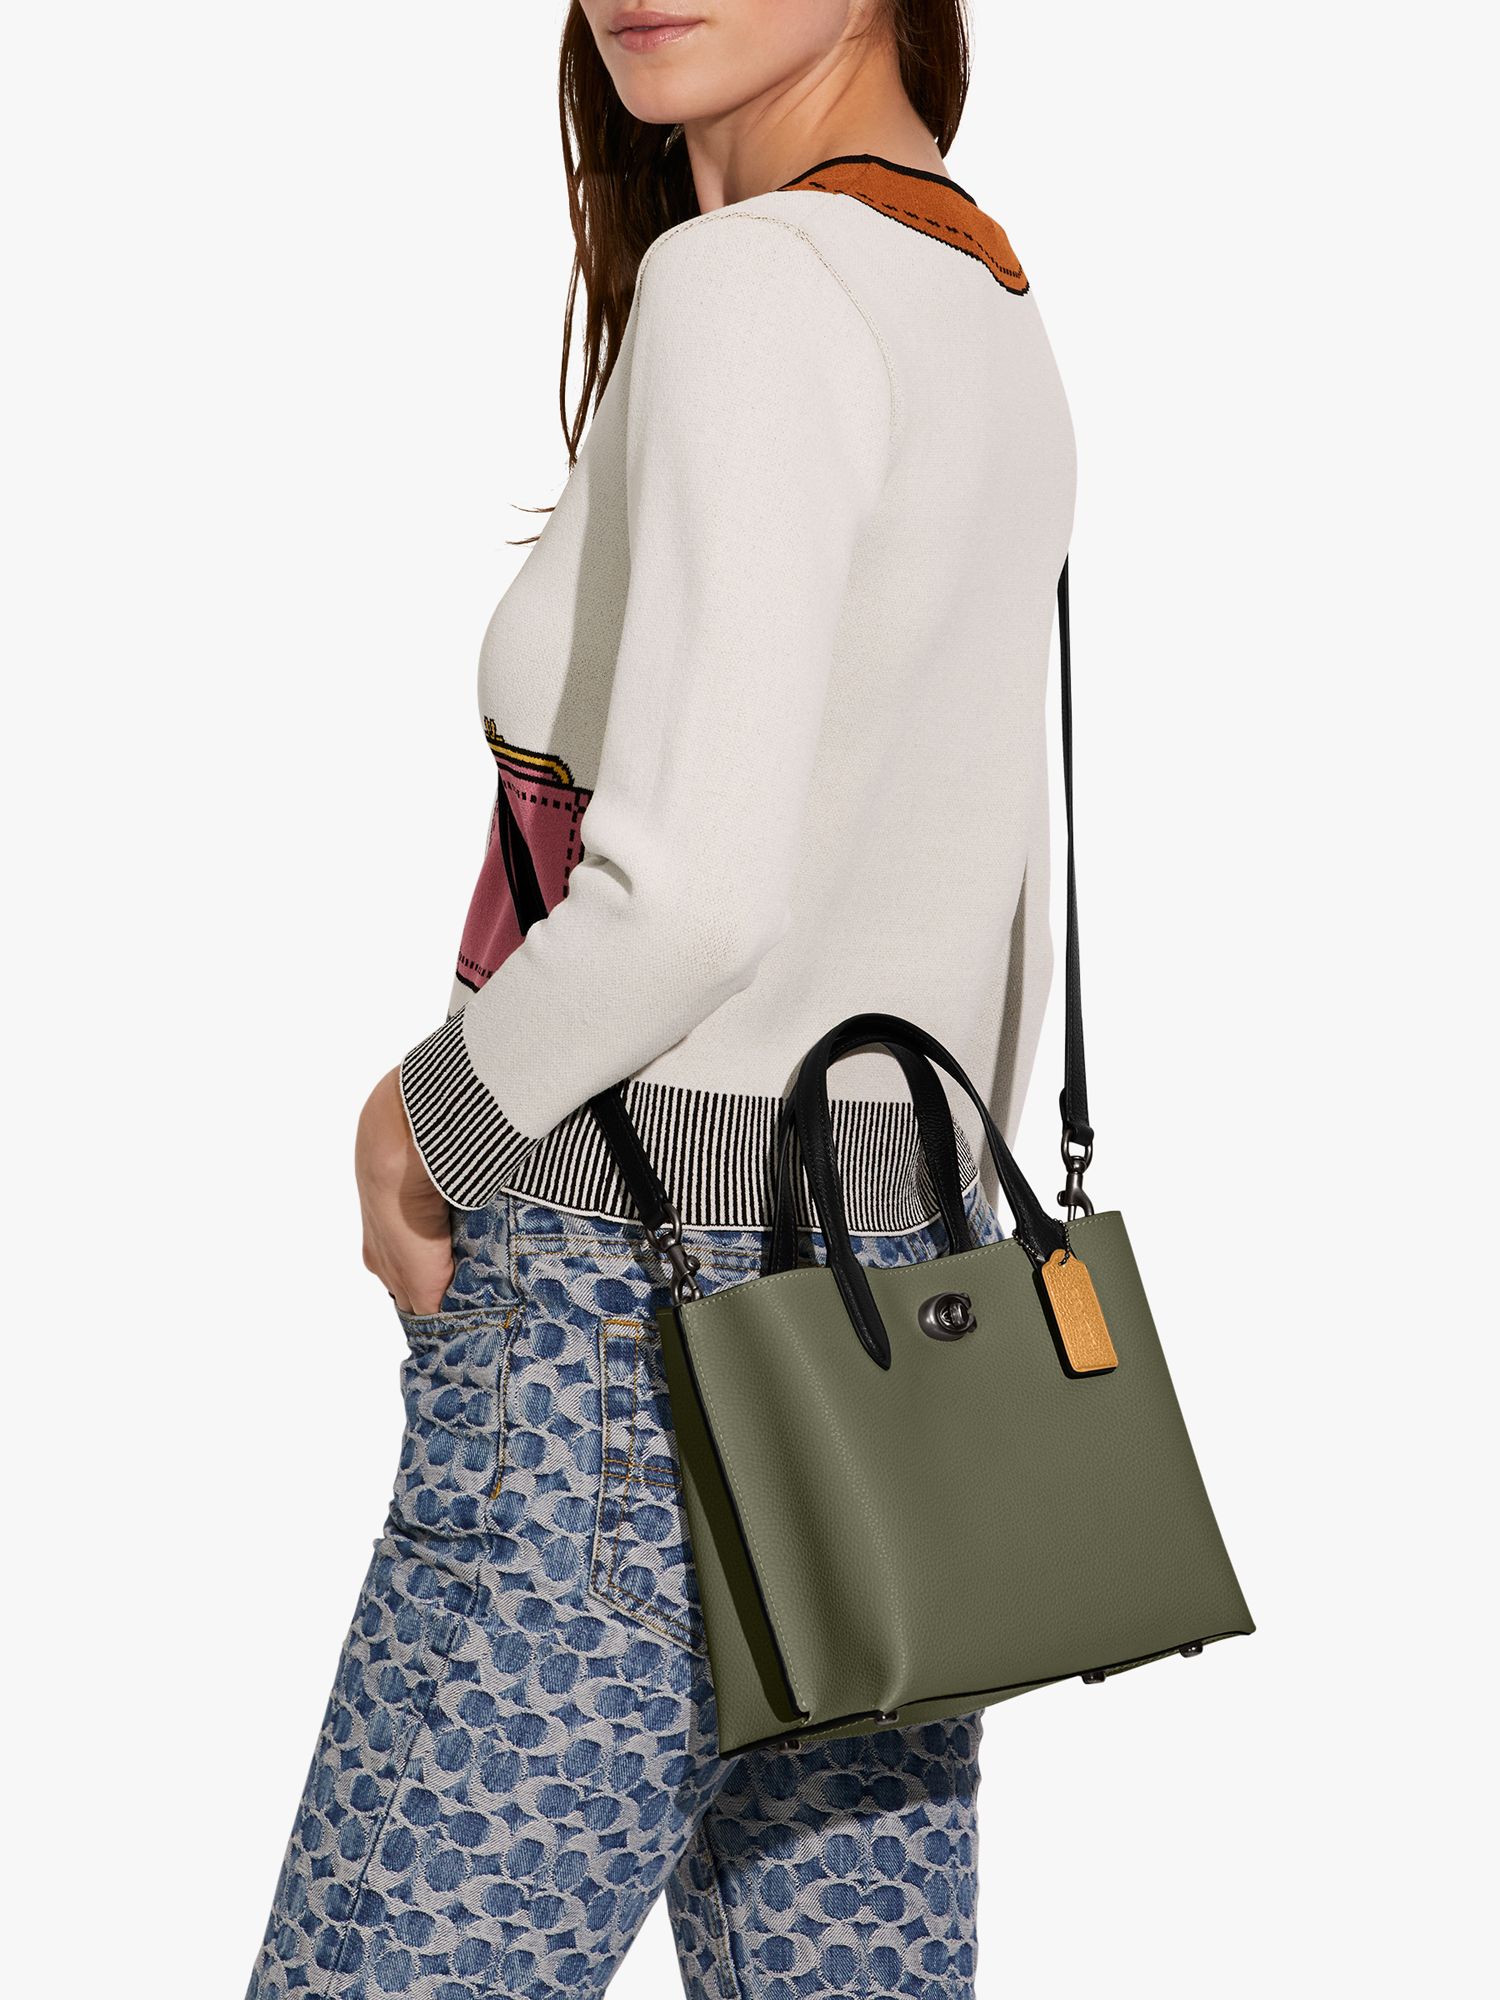 Coach Willow 24 Leather Shoulder Bag, Army Green at John Lewis & Partners